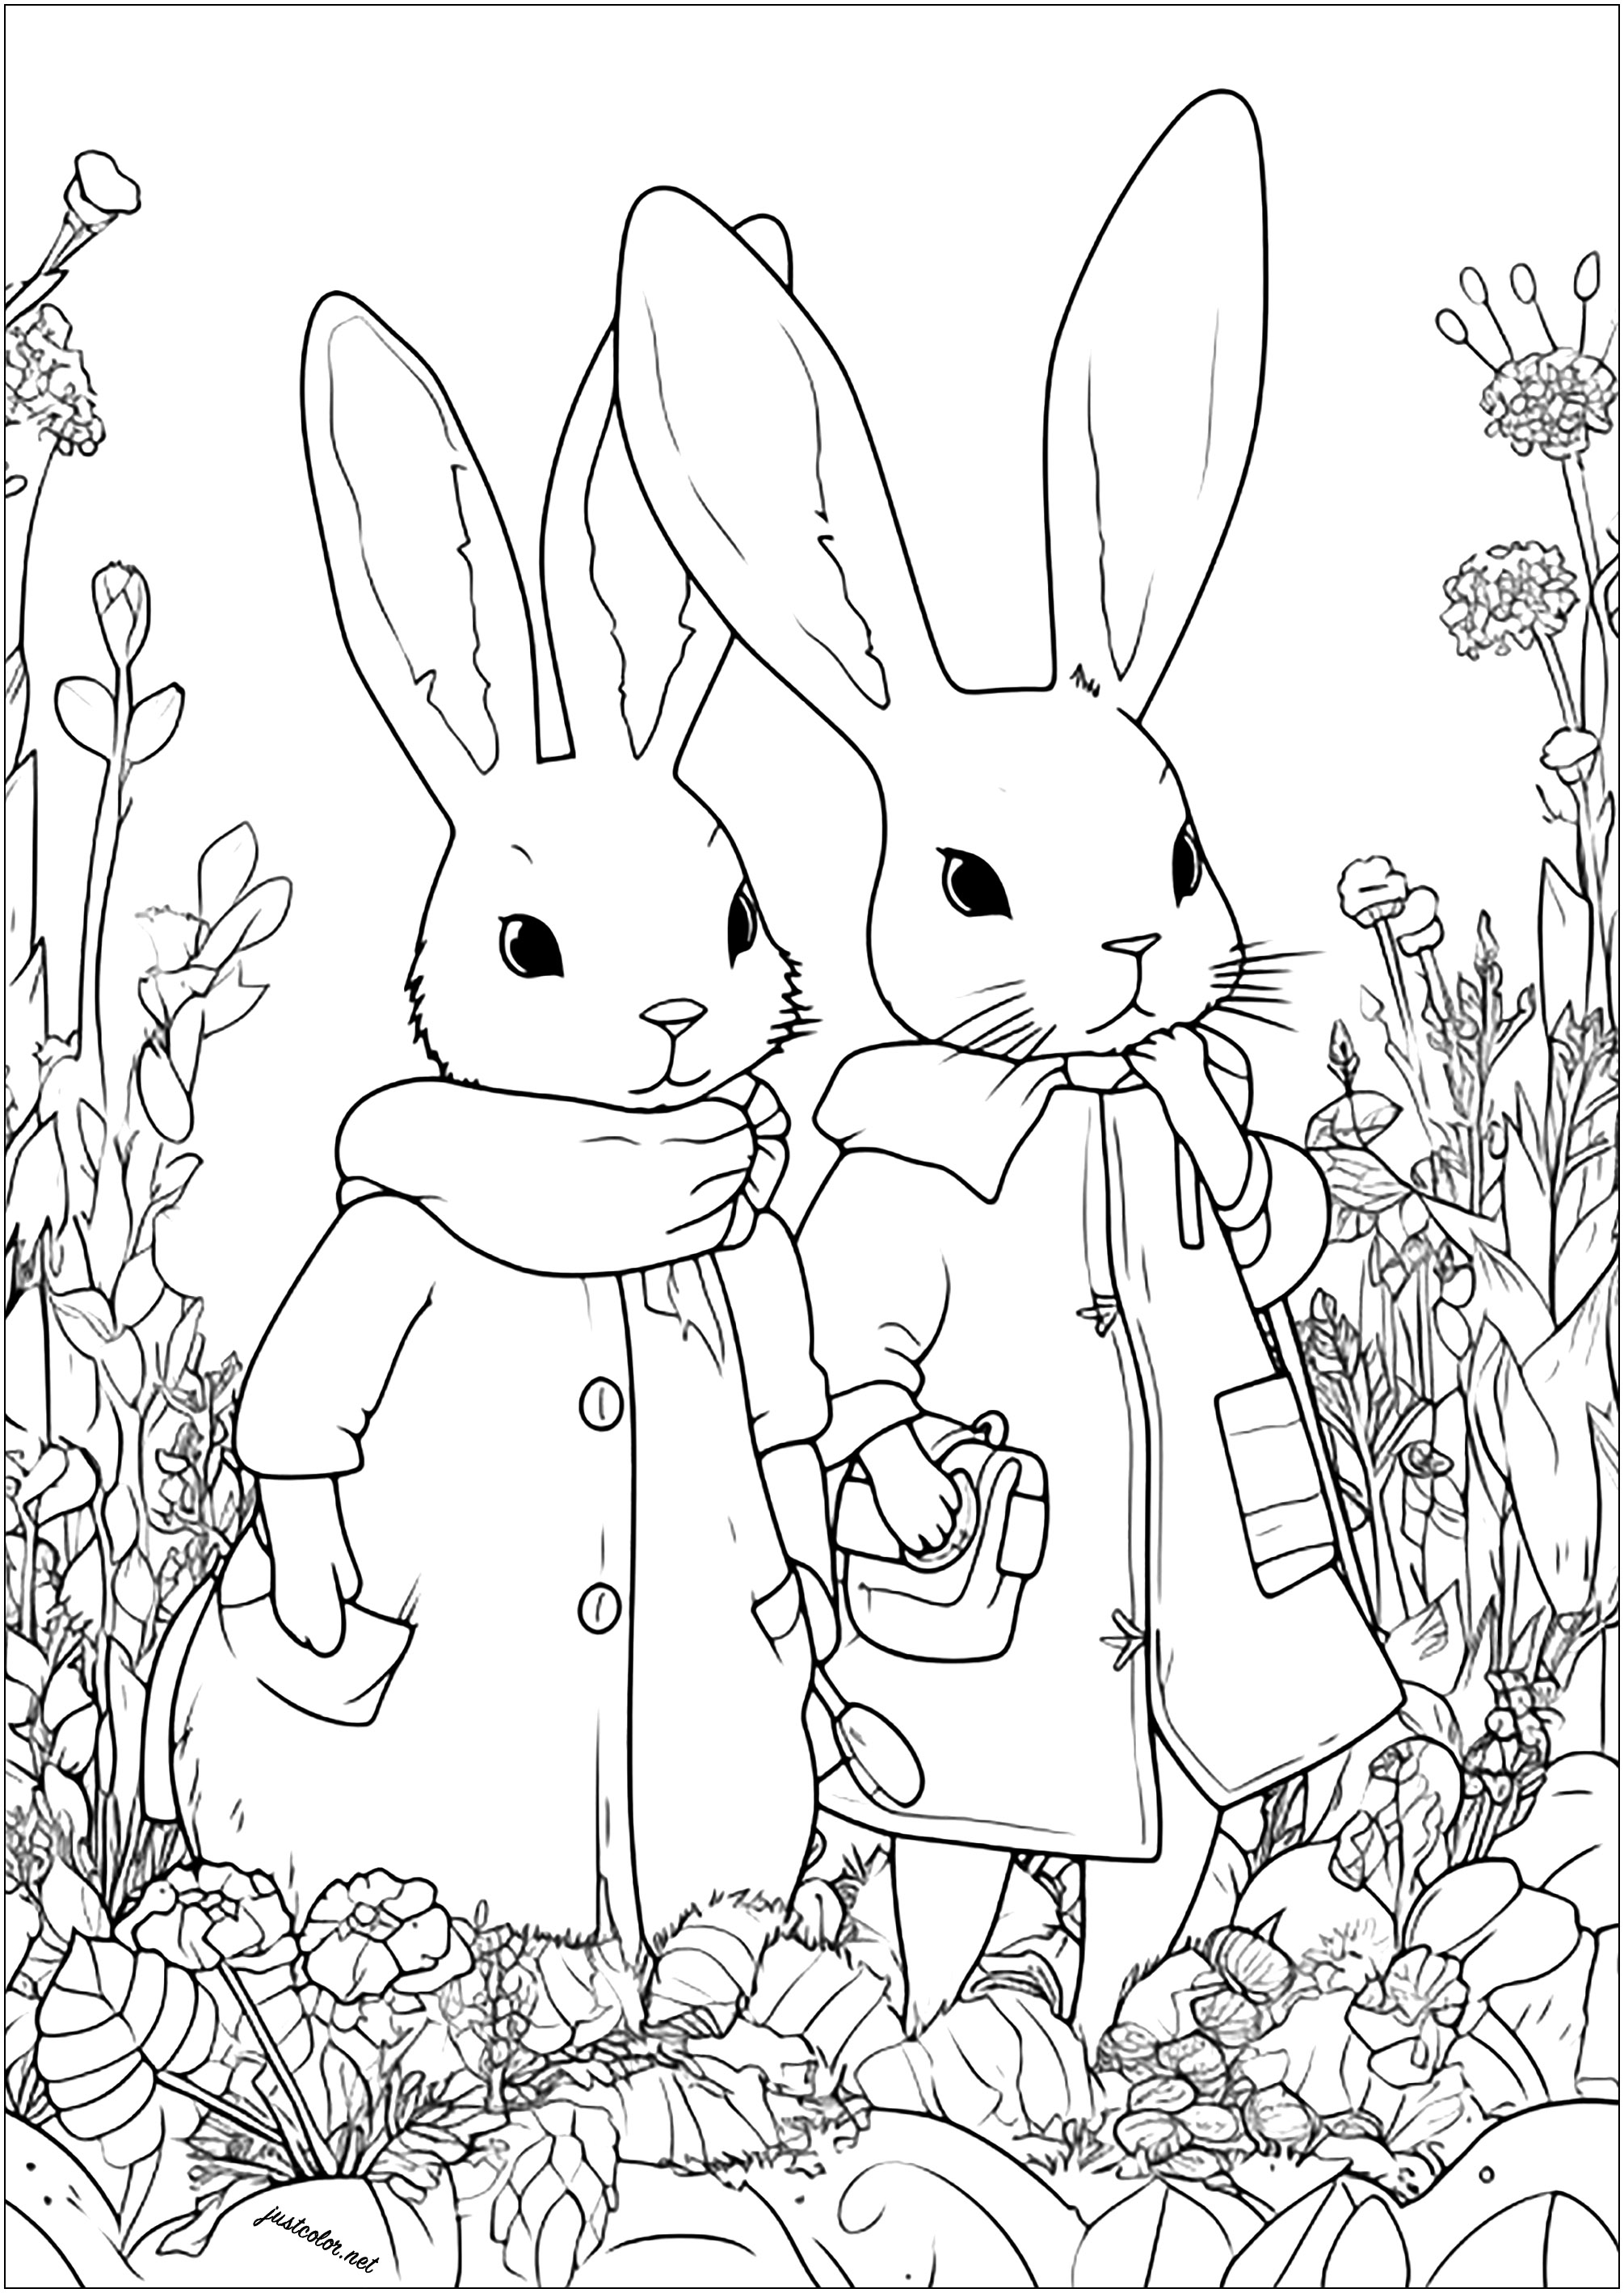 Two adventurous rabbits in a field of flowers. Rabbits drawn with a unique style, looking ready to set off on an adventure ...